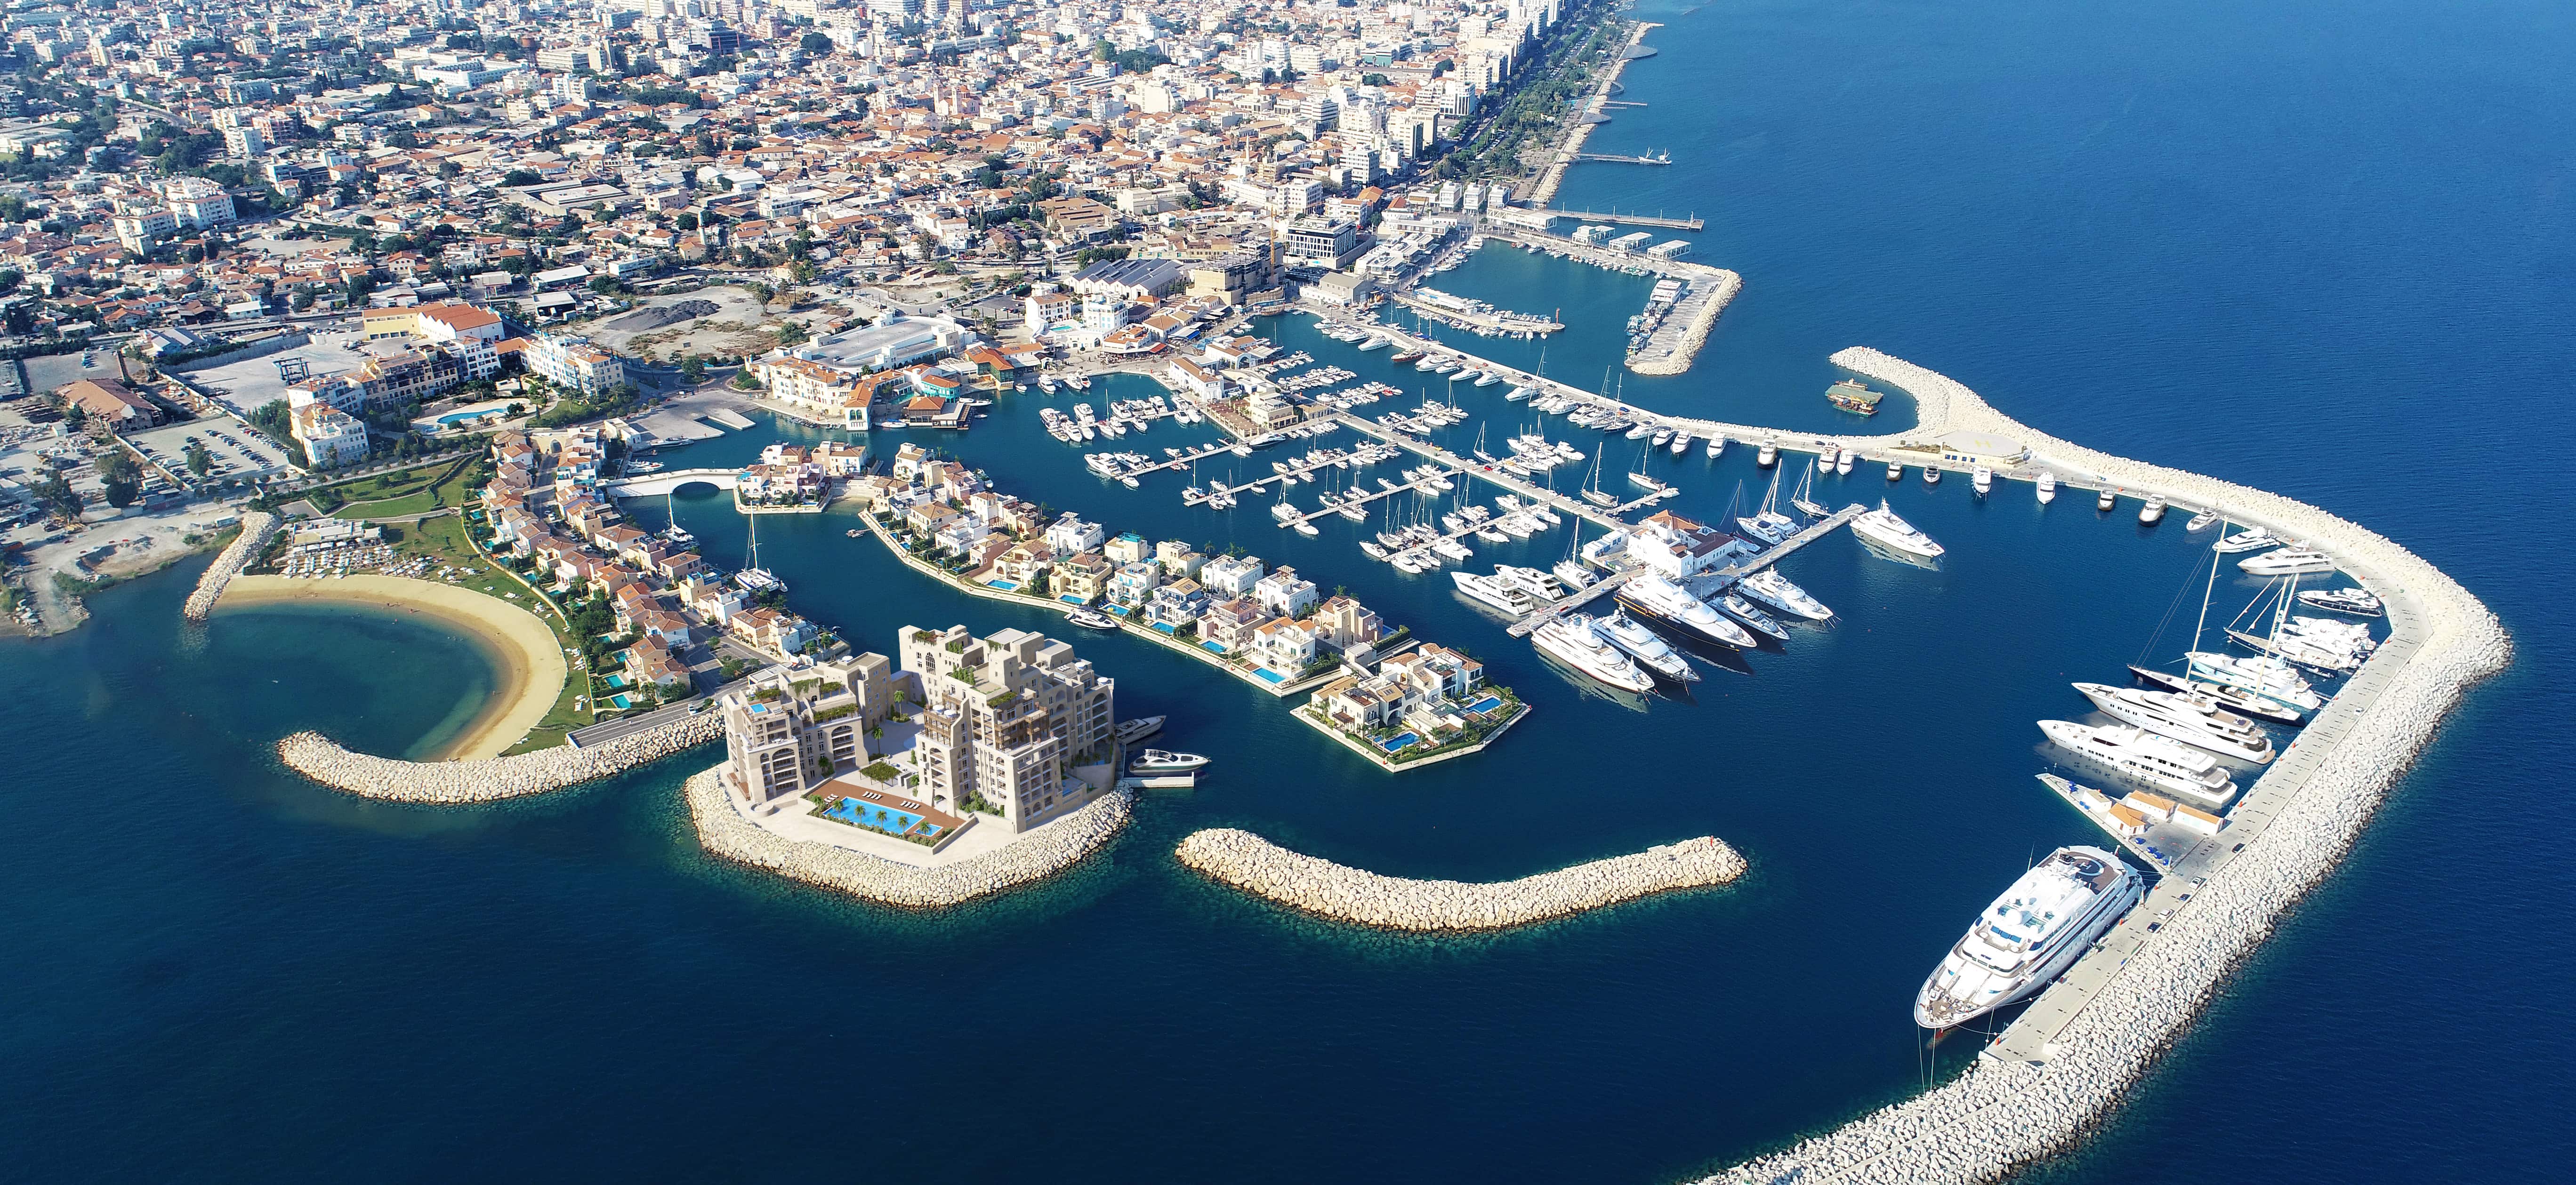 Marina surrounded by blue sea and luxury residences